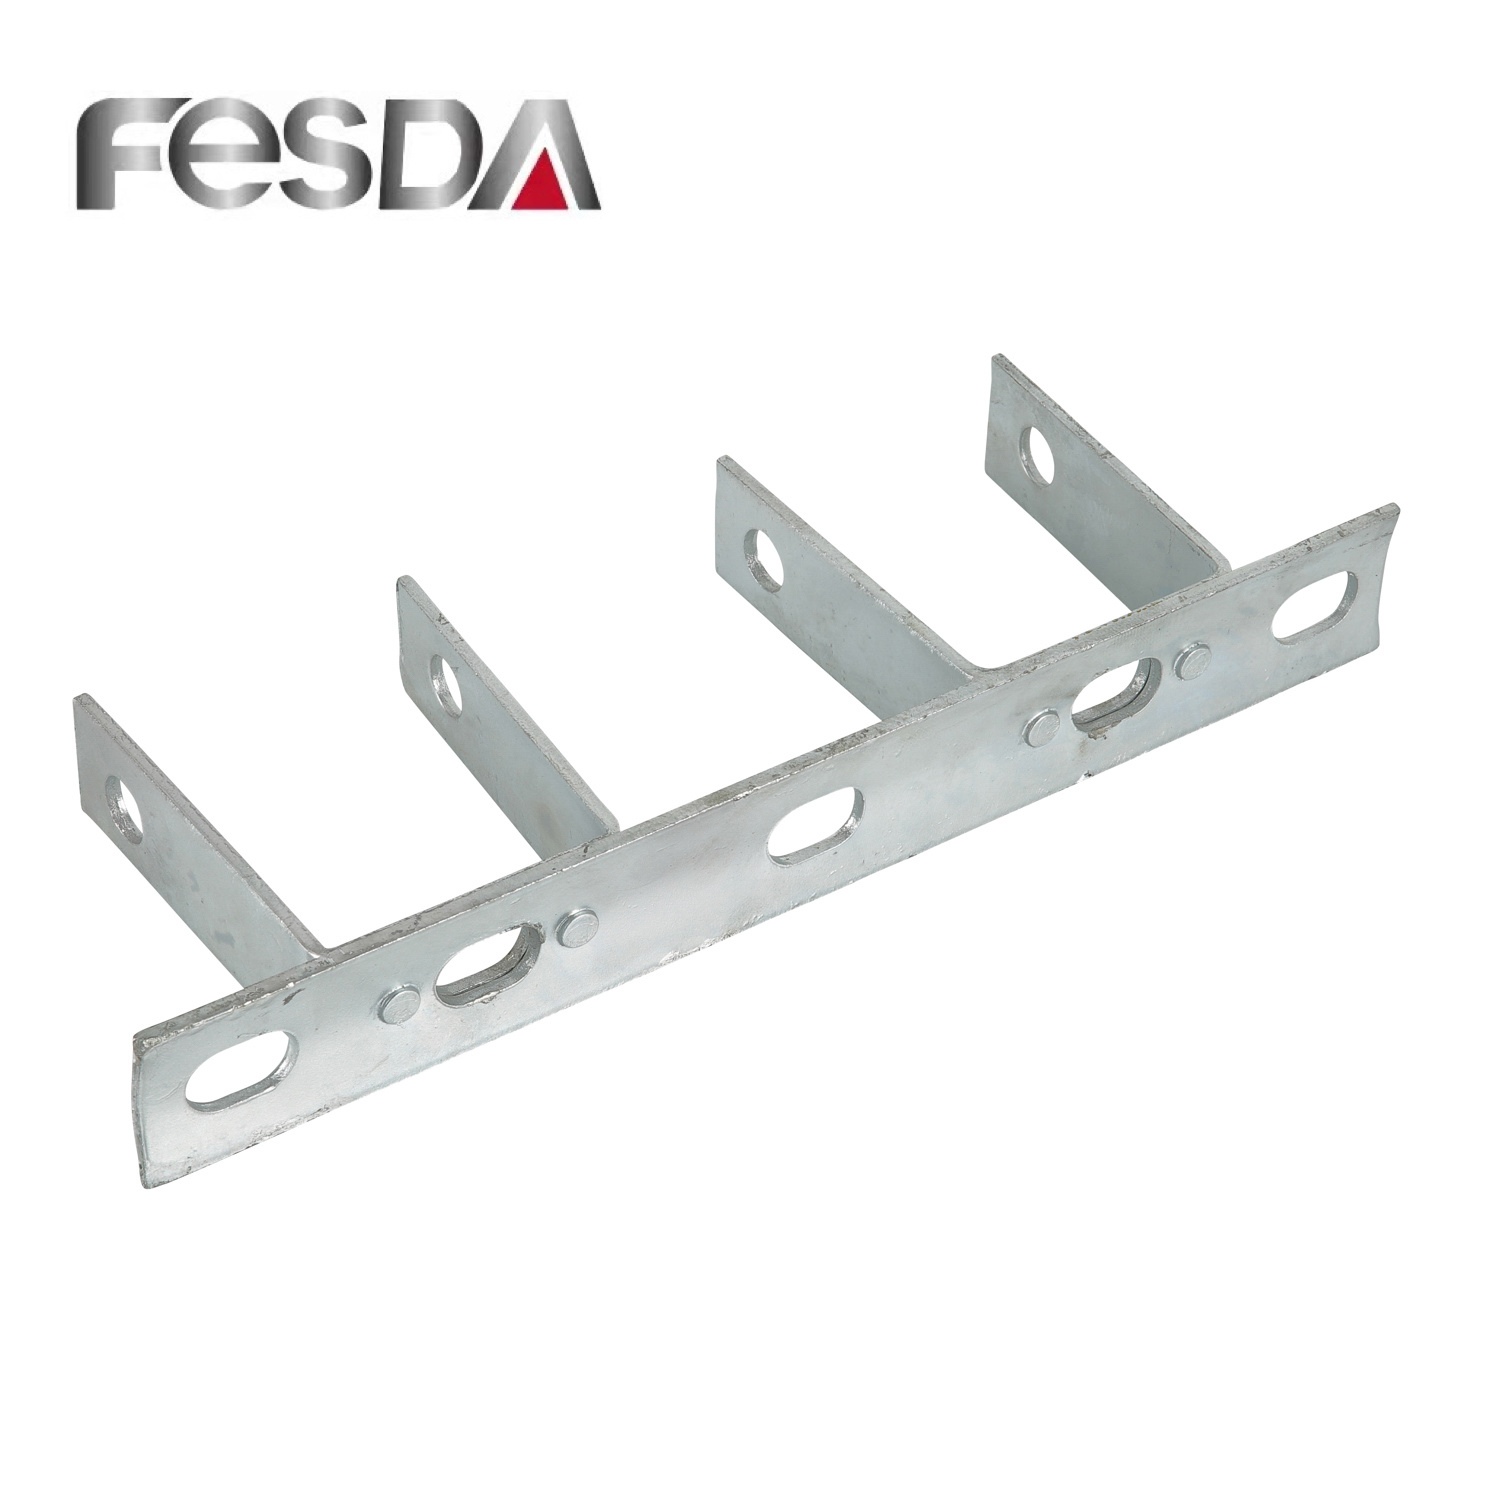 Water-Proof Insulation Piercing Aluminium Pg Clamp for Wire Connection Cable Clamp